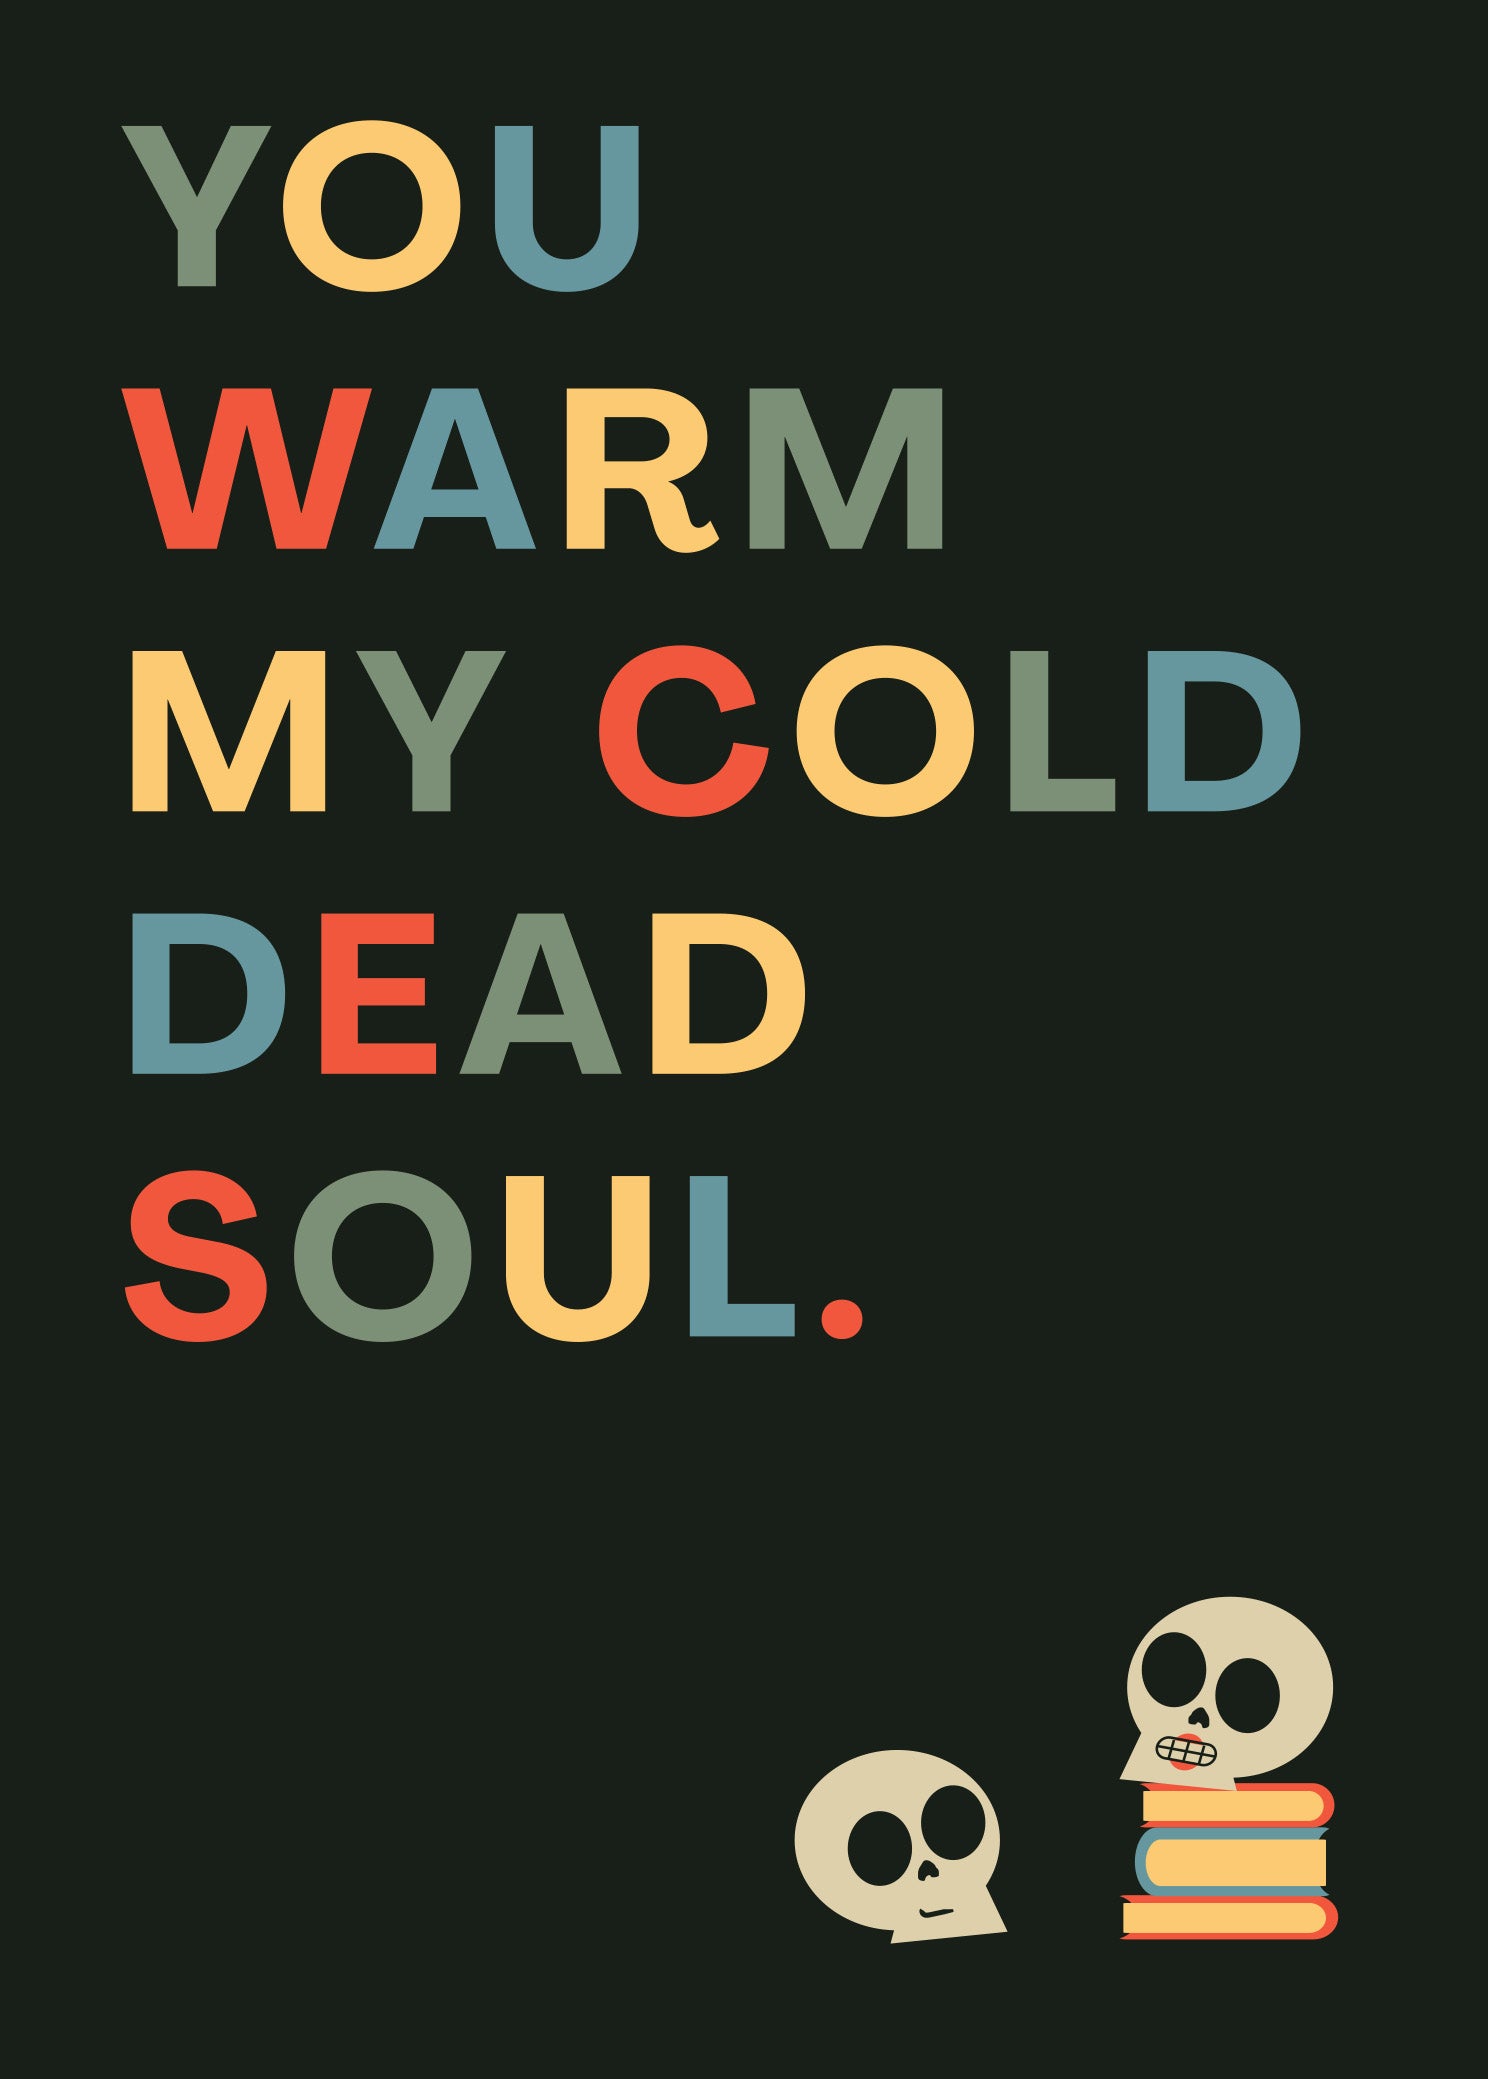 Cold Dead Soul Funny Card by Betiobca at penny black